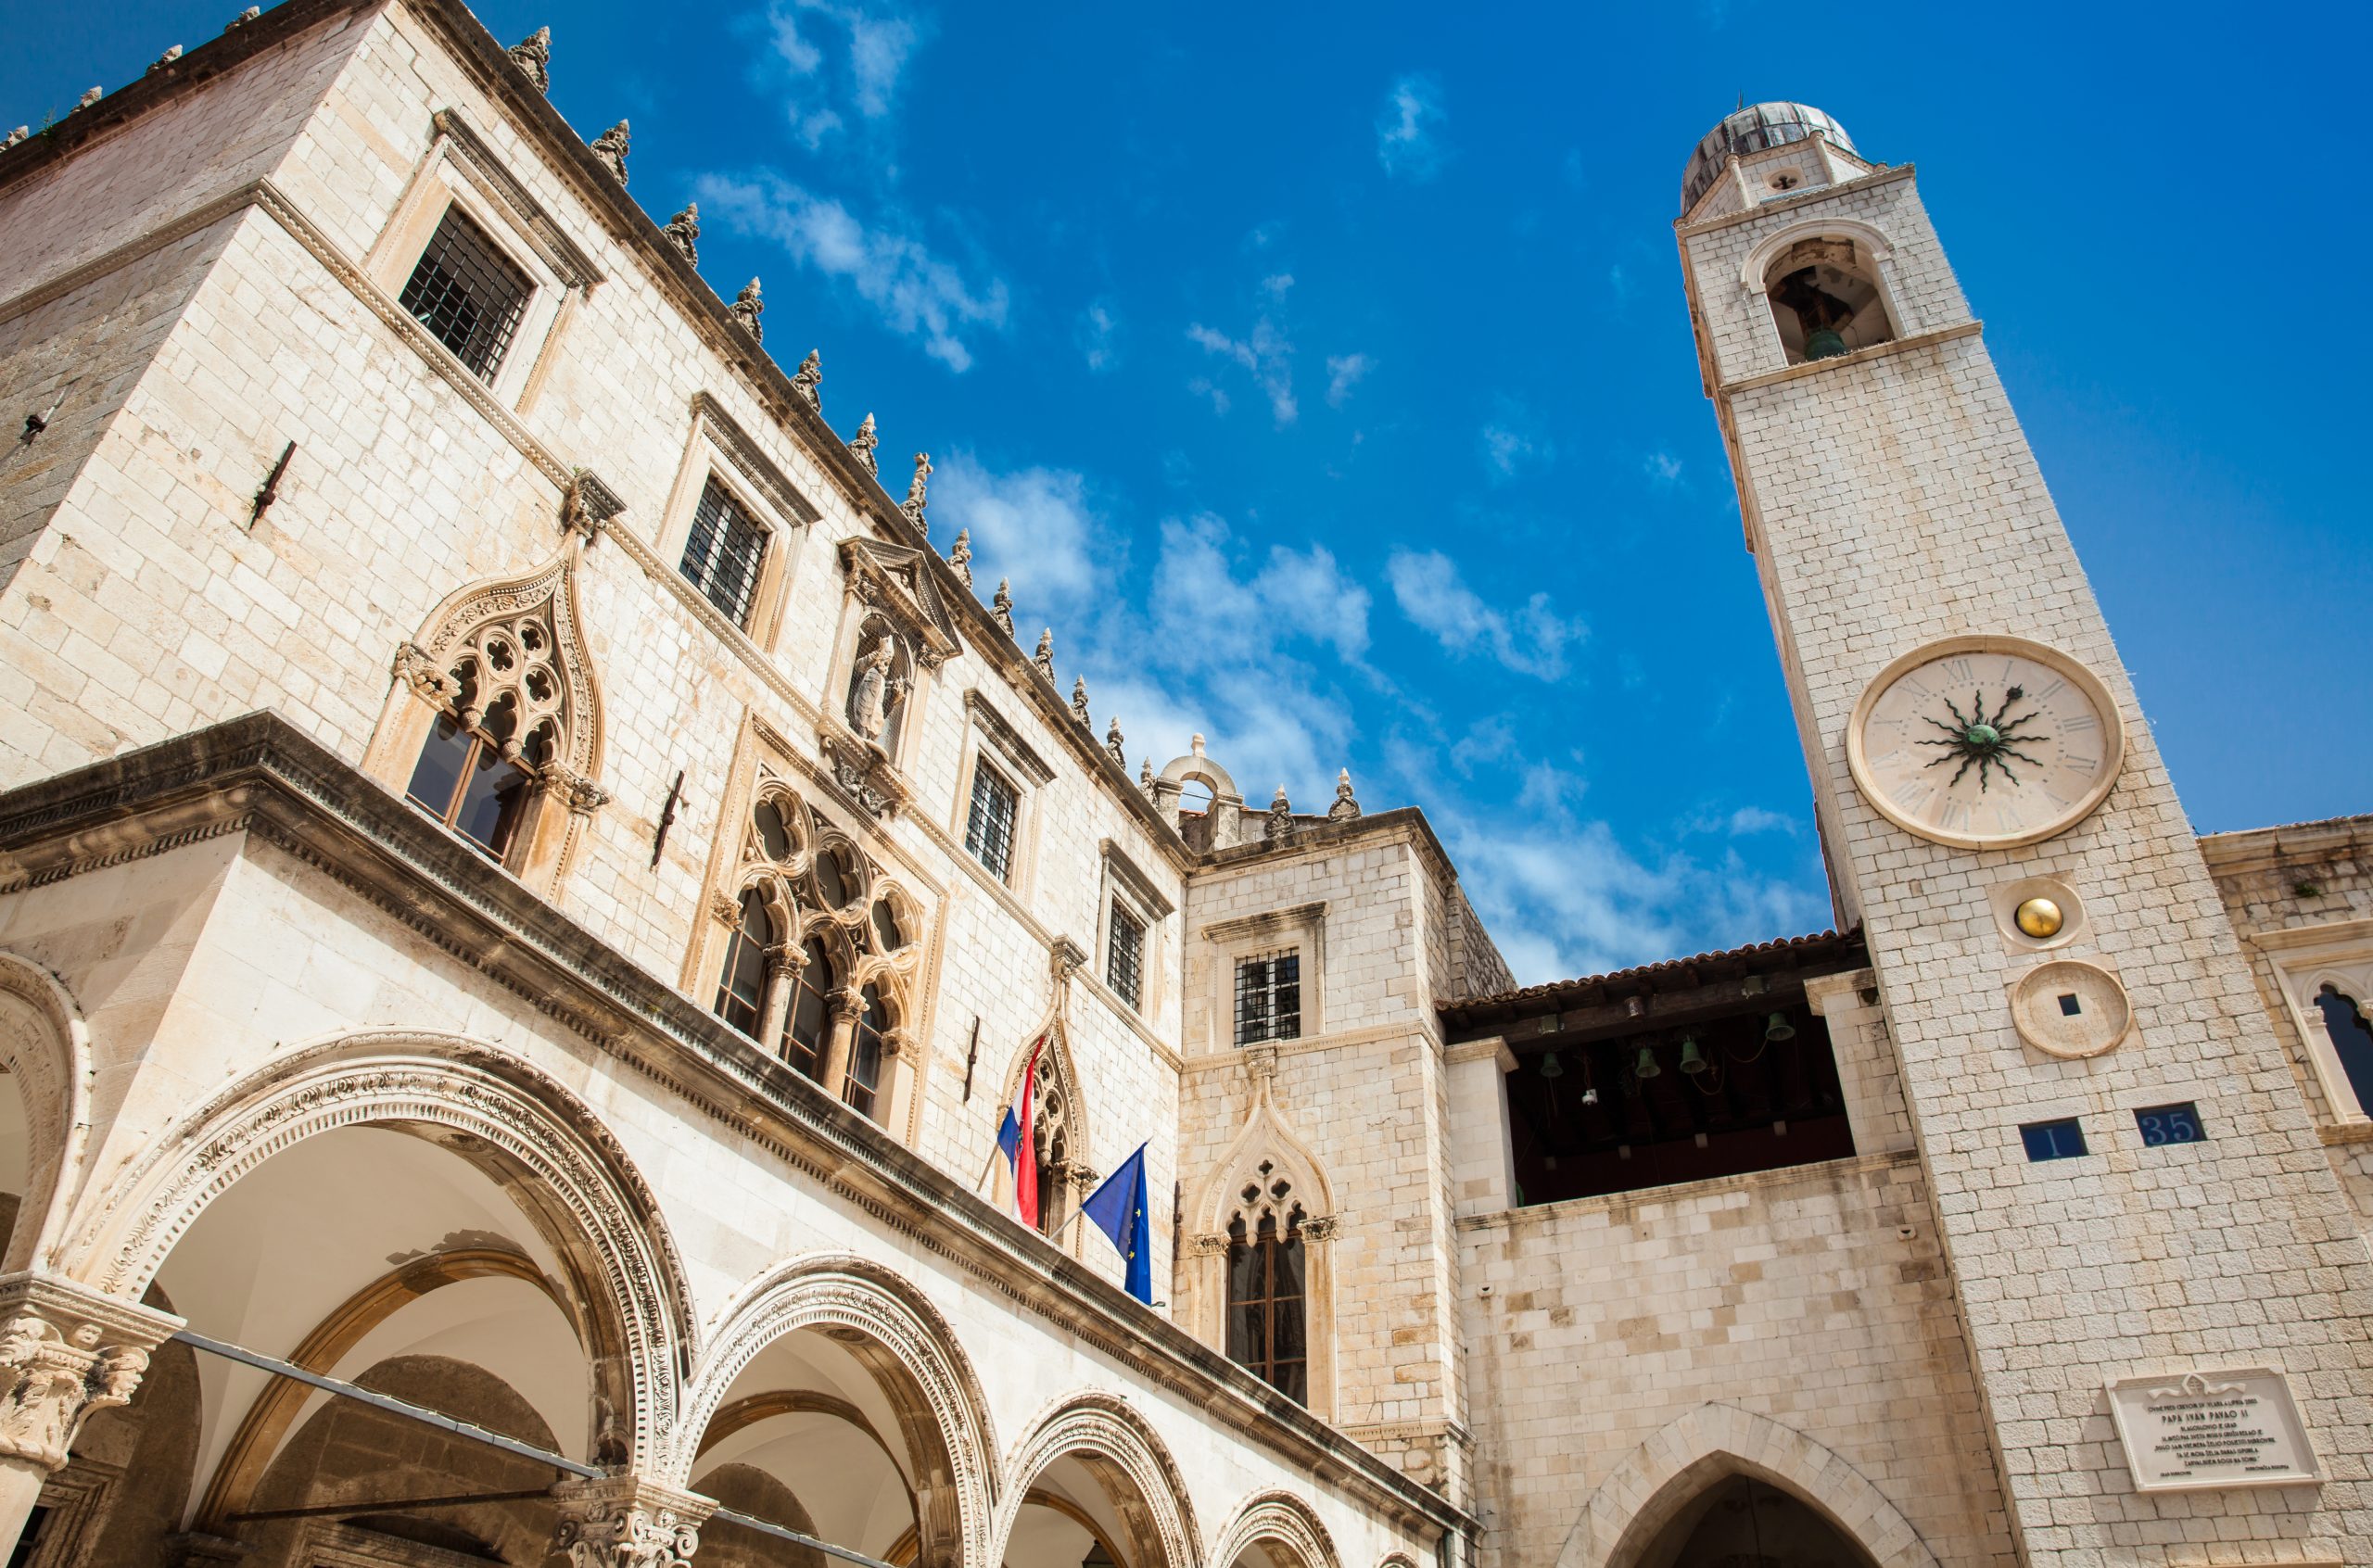 Stop At The Famous Sponza Palace During The Dubrovnik City Tour